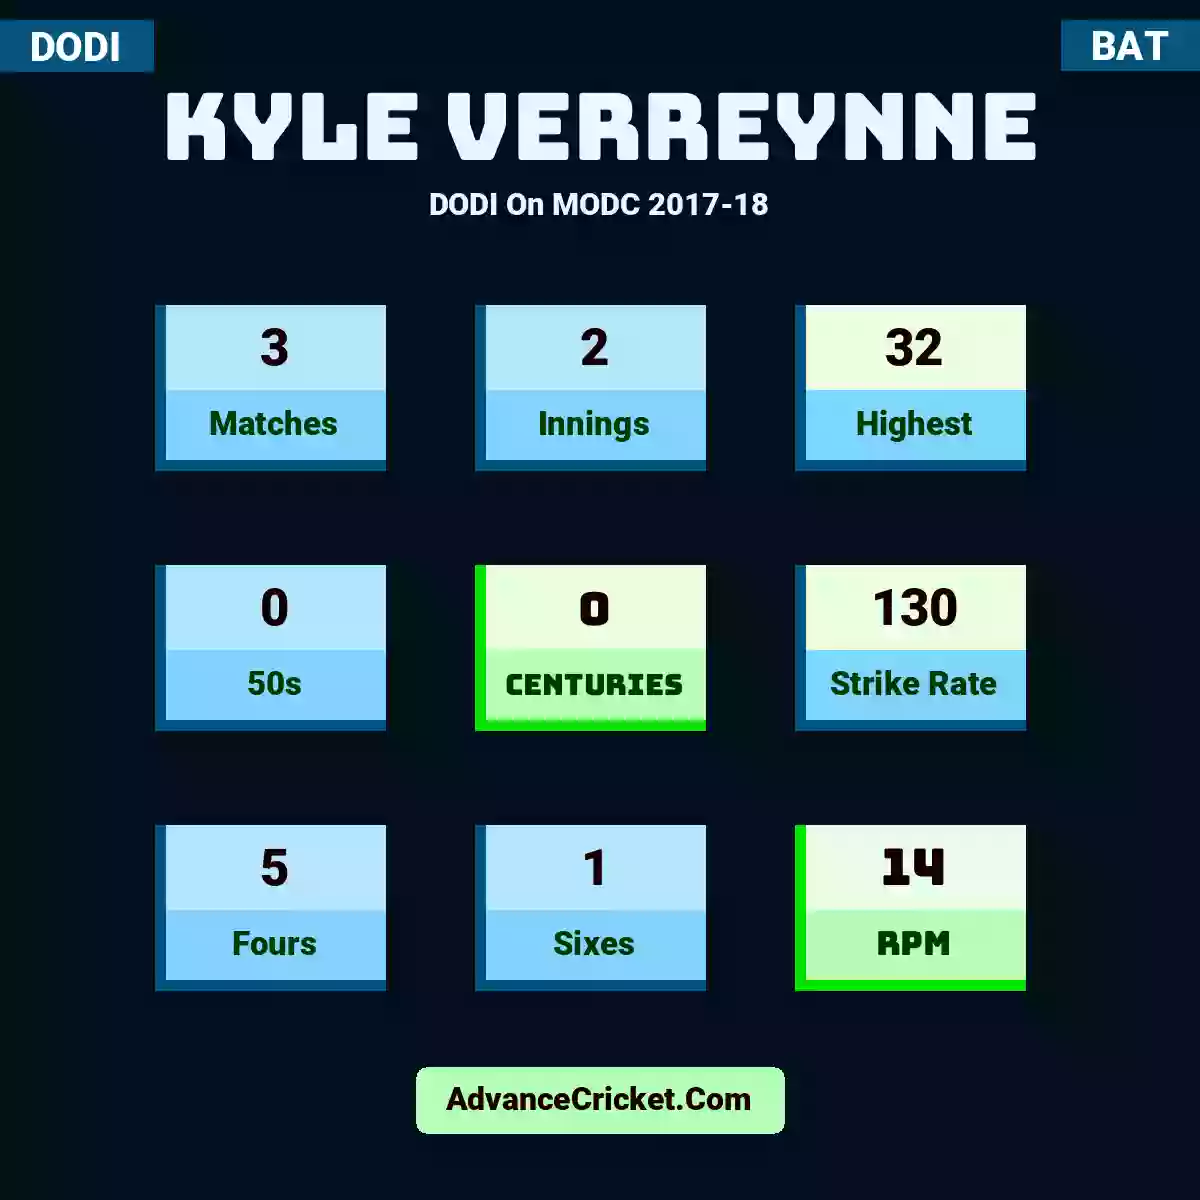 Kyle Verreynne DODI  On MODC 2017-18, Kyle Verreynne played 3 matches, scored 32 runs as highest, 0 half-centuries, and 0 centuries, with a strike rate of 130. K.Verreynne hit 5 fours and 1 sixes, with an RPM of 14.